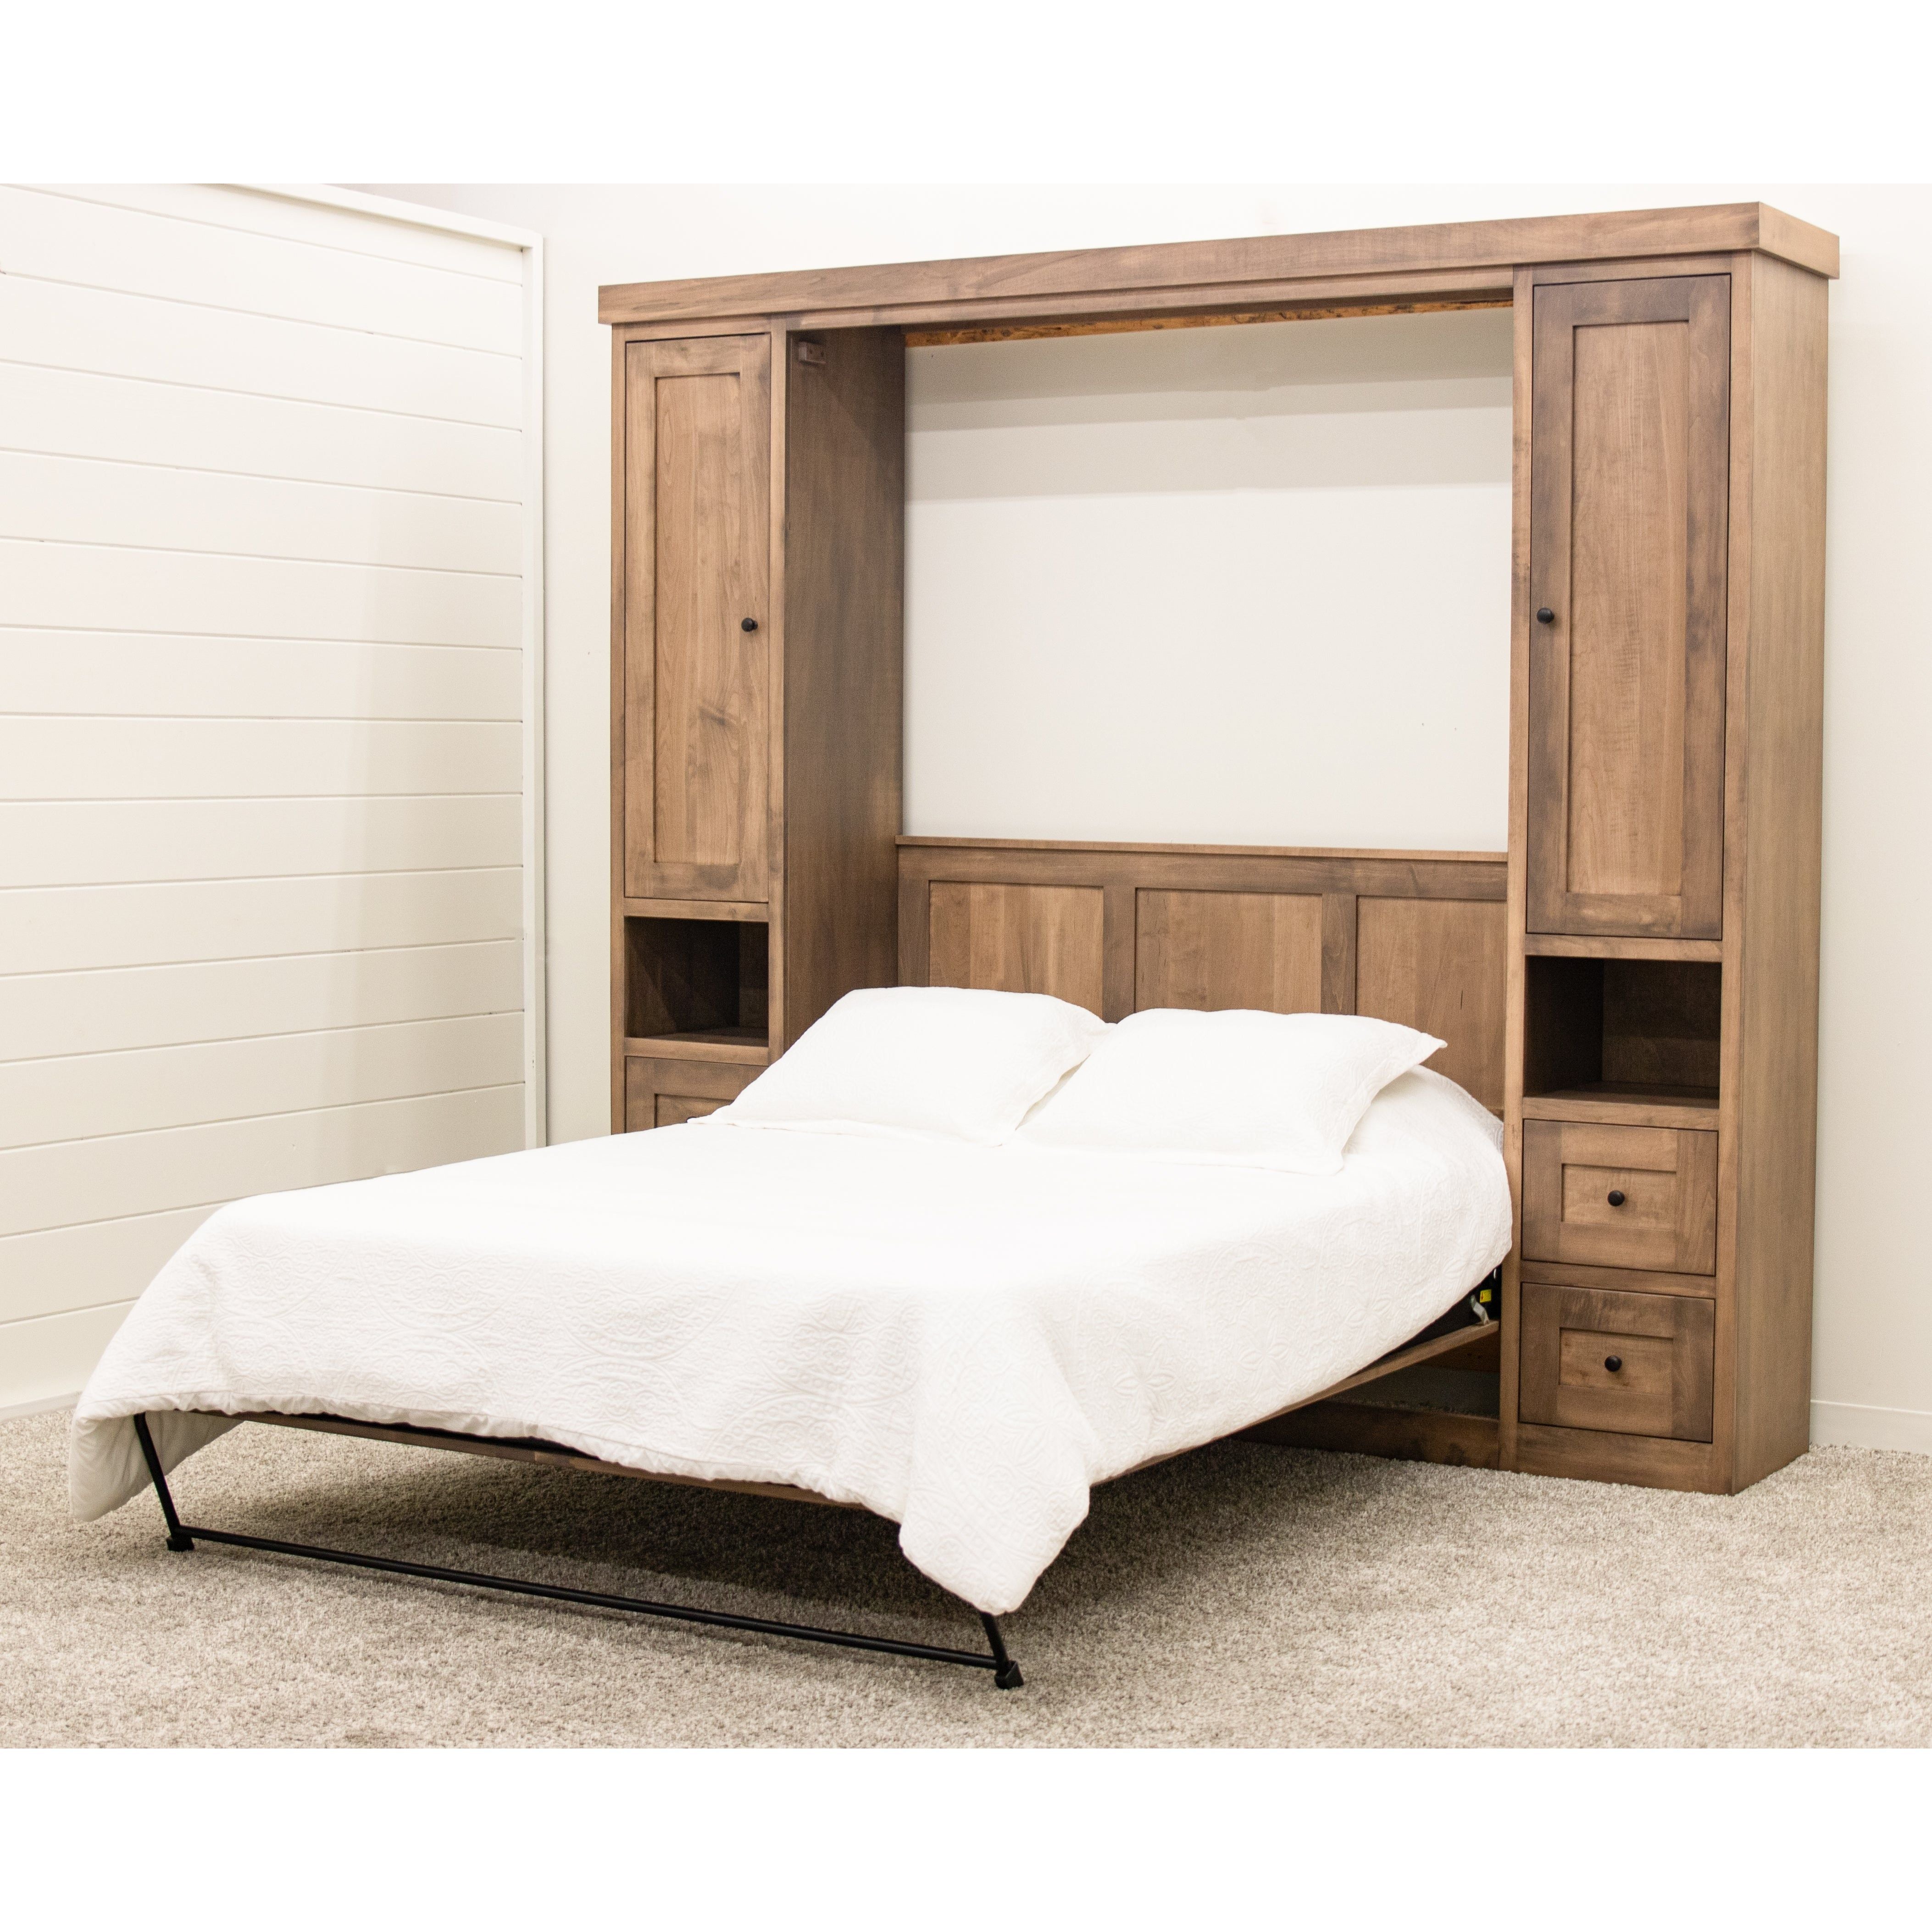 Sunset Murphy Bed with Bookcases